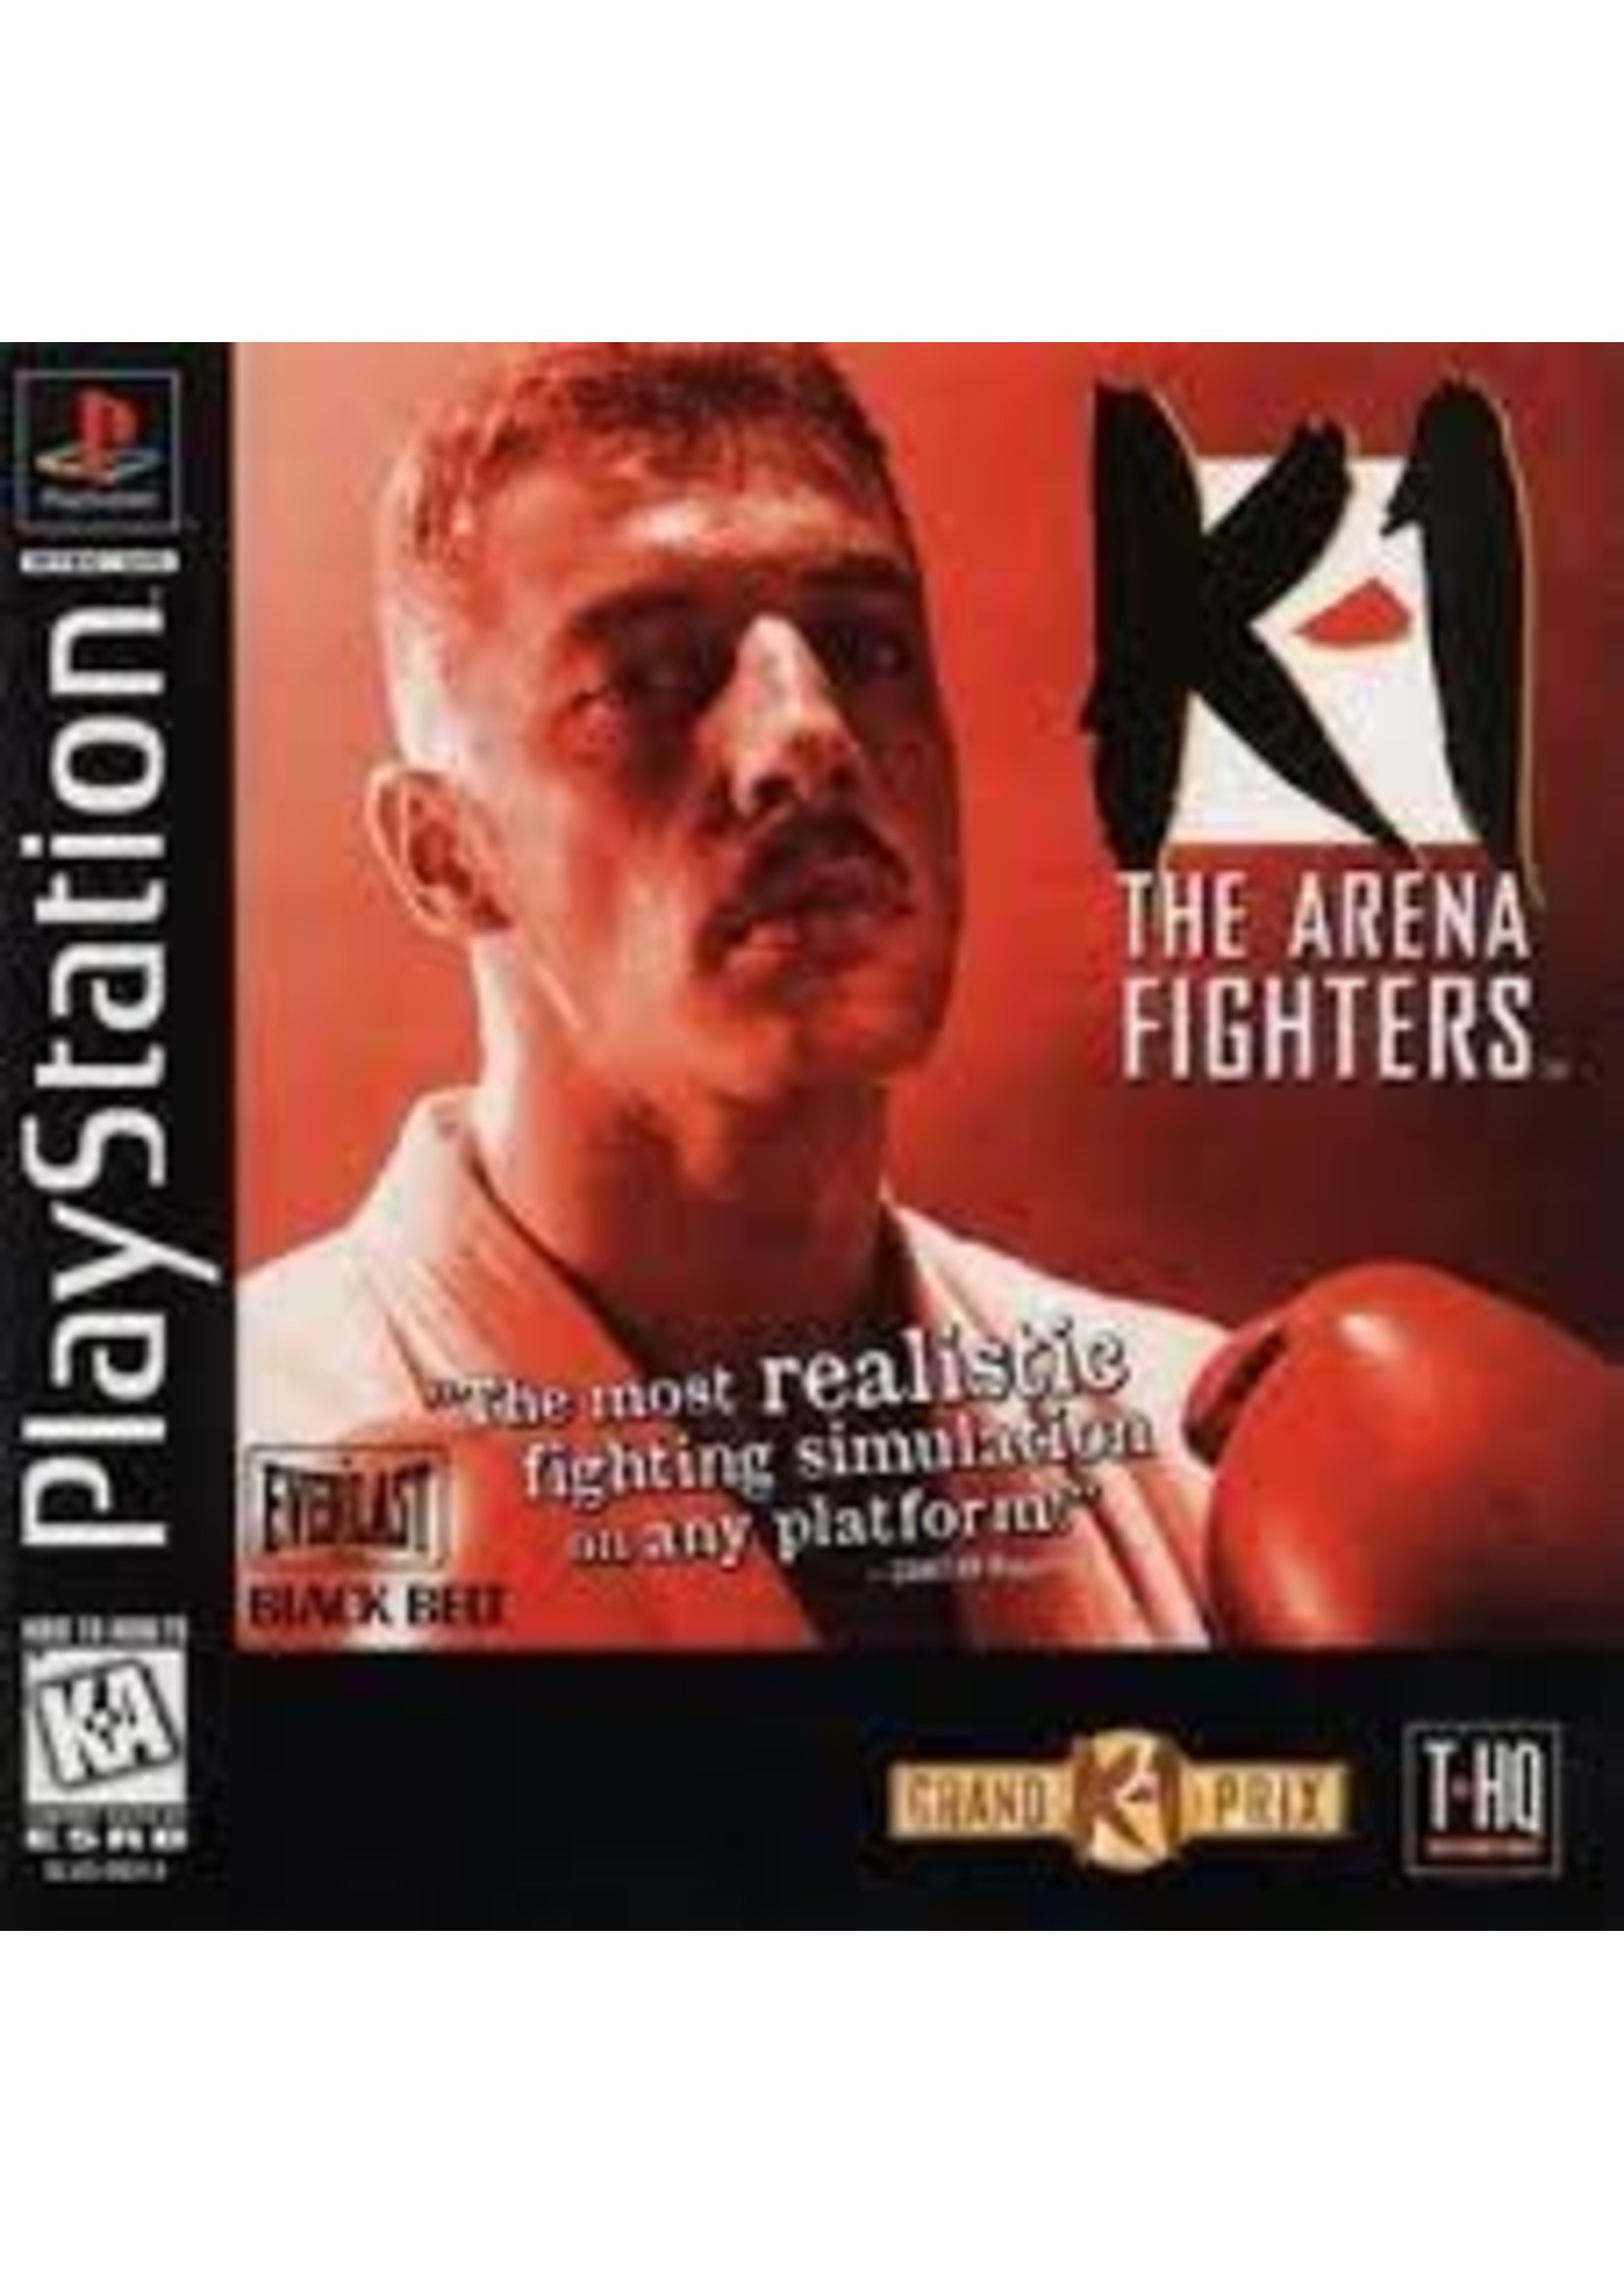 Sony Playstation 1 (PS1) K-1 the Arena Fighters